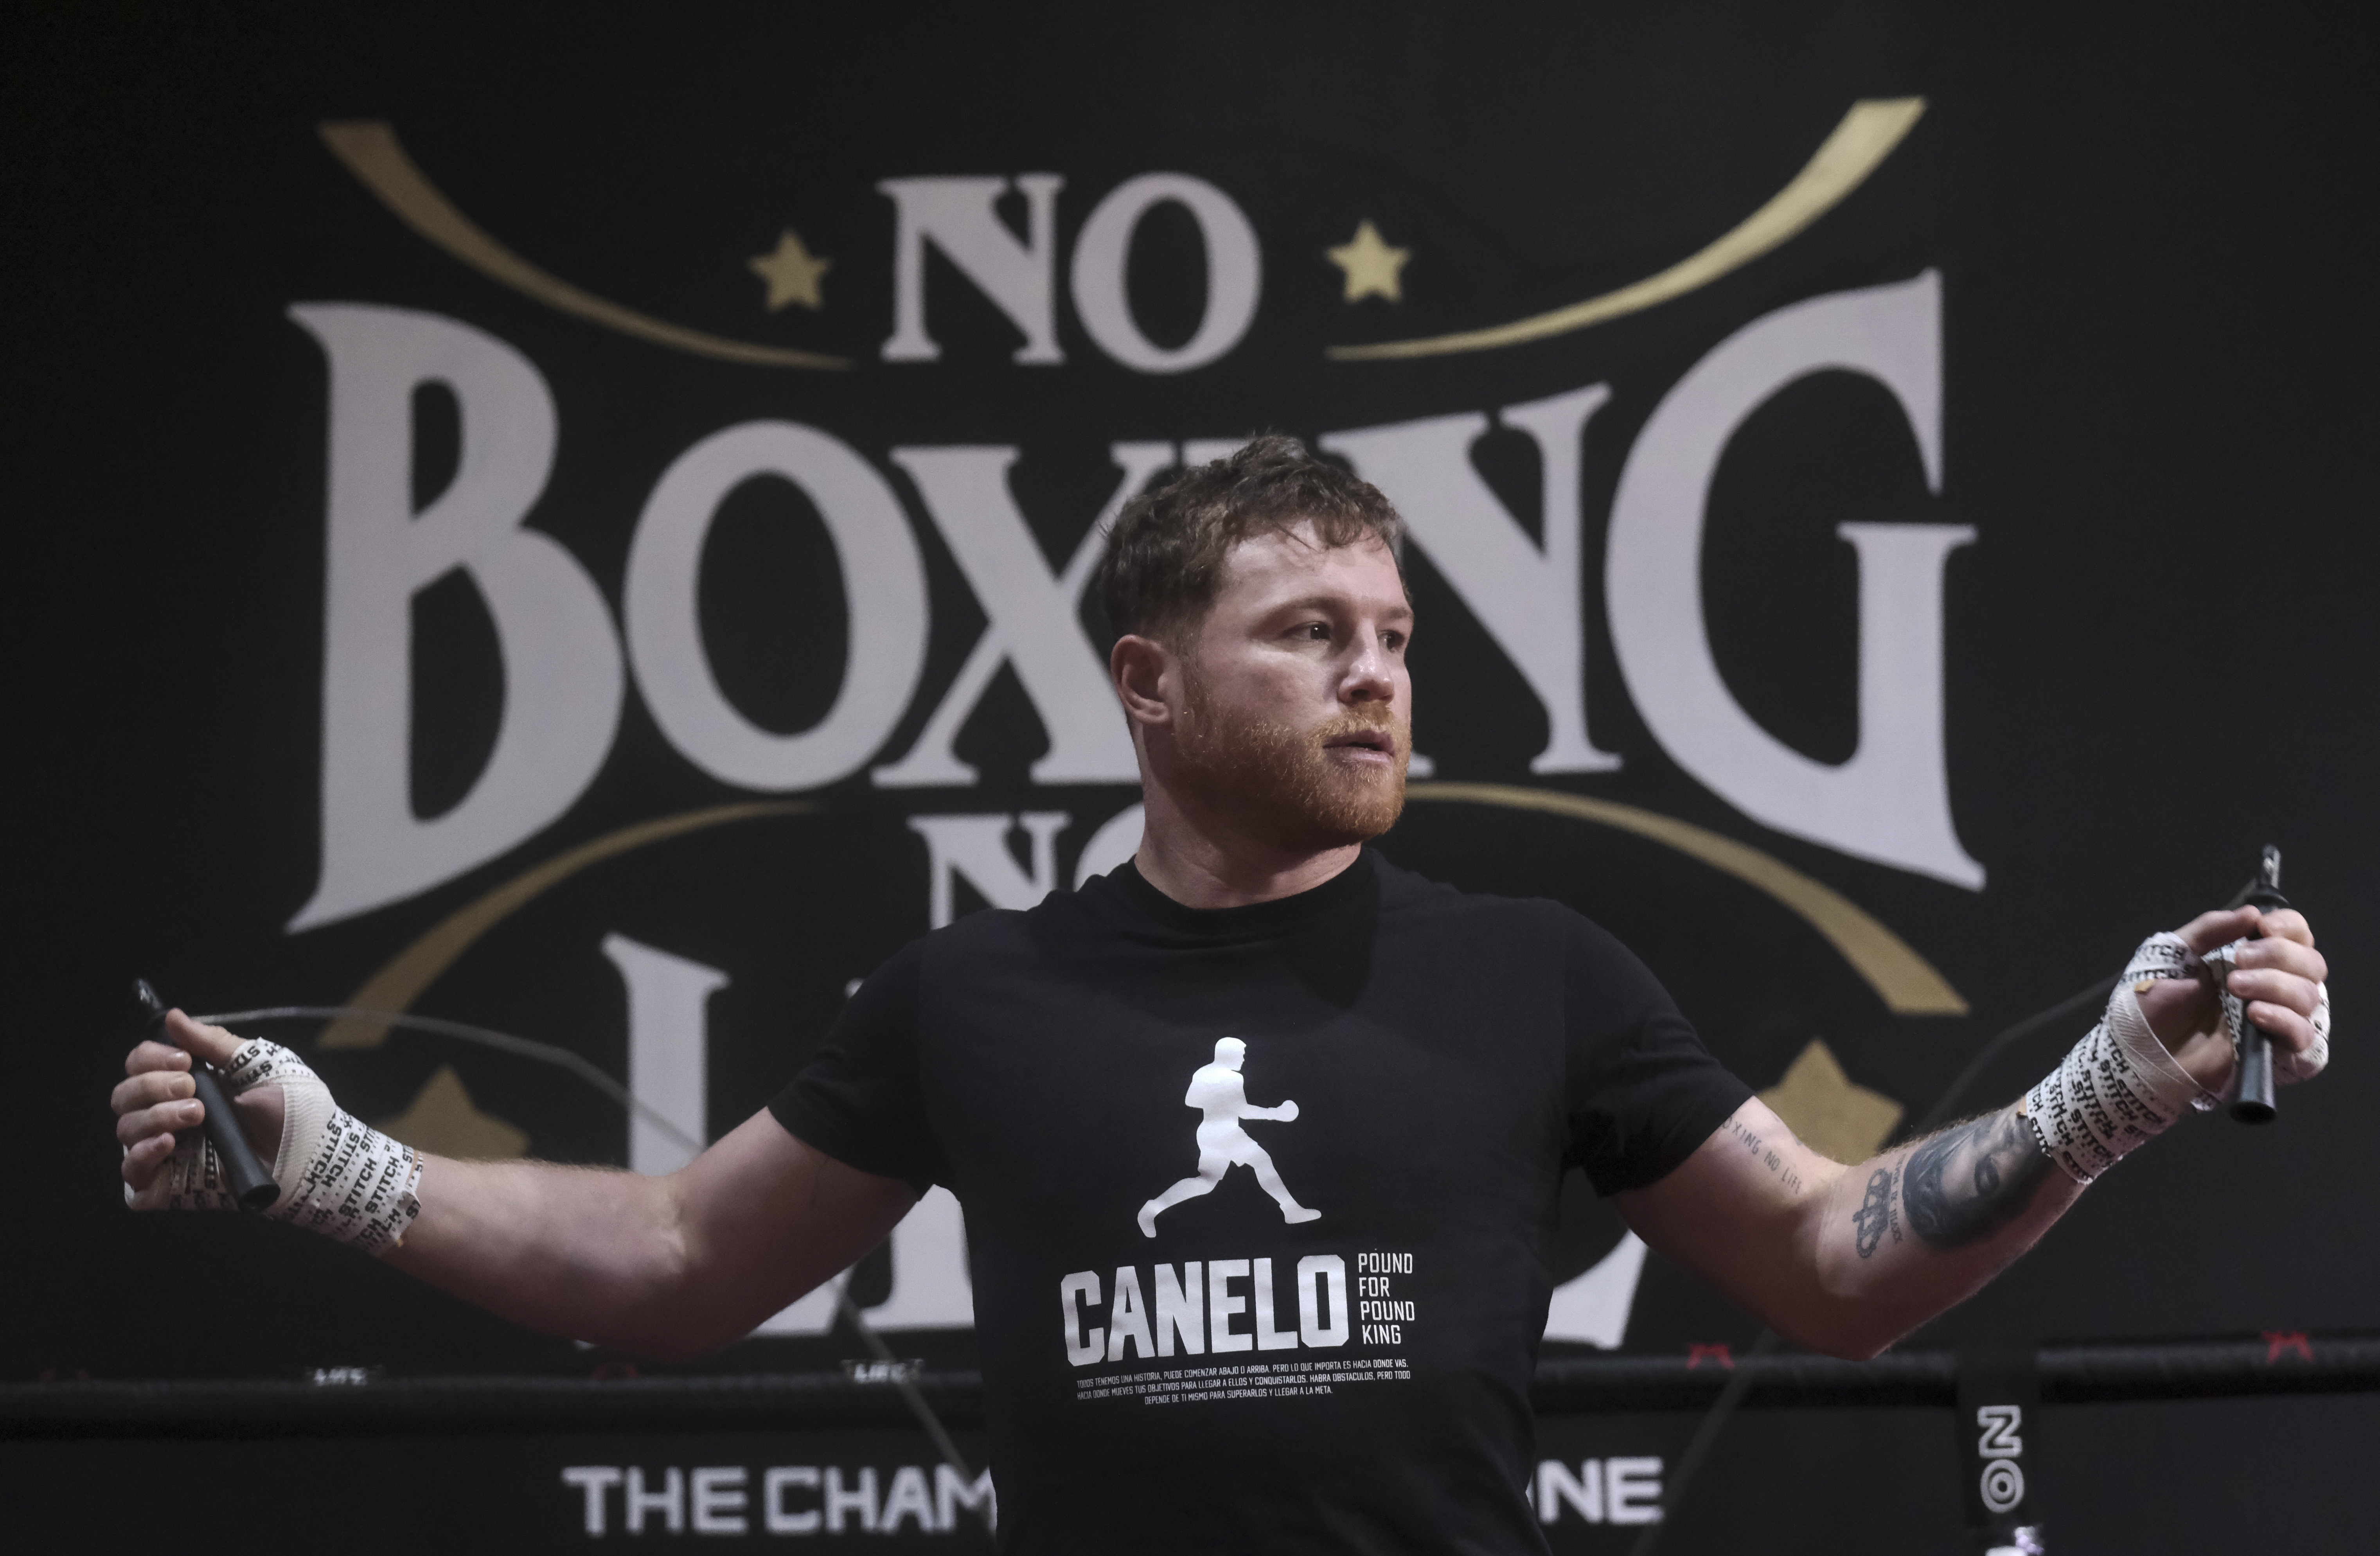 Canelo Alvarez is an undisputed world champion. Why does he have so many  detractors?